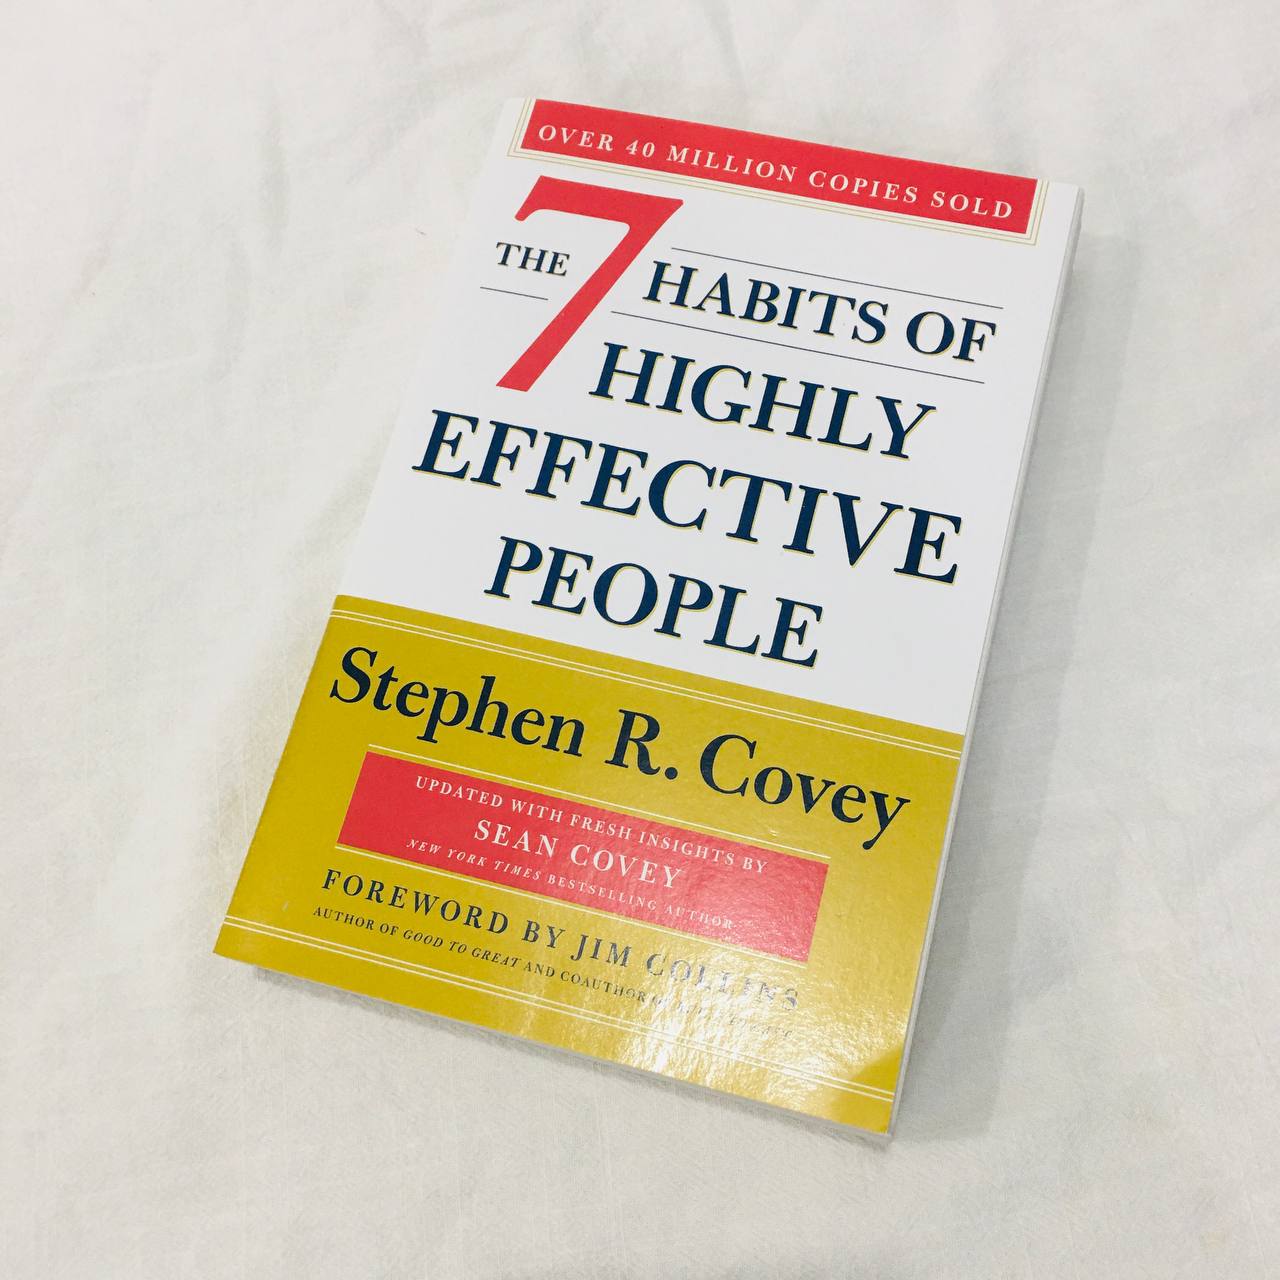 Sách ngoại văn cũ giá rẻ | The 7 Habits of Highly Effective People by Stephen R. Covey